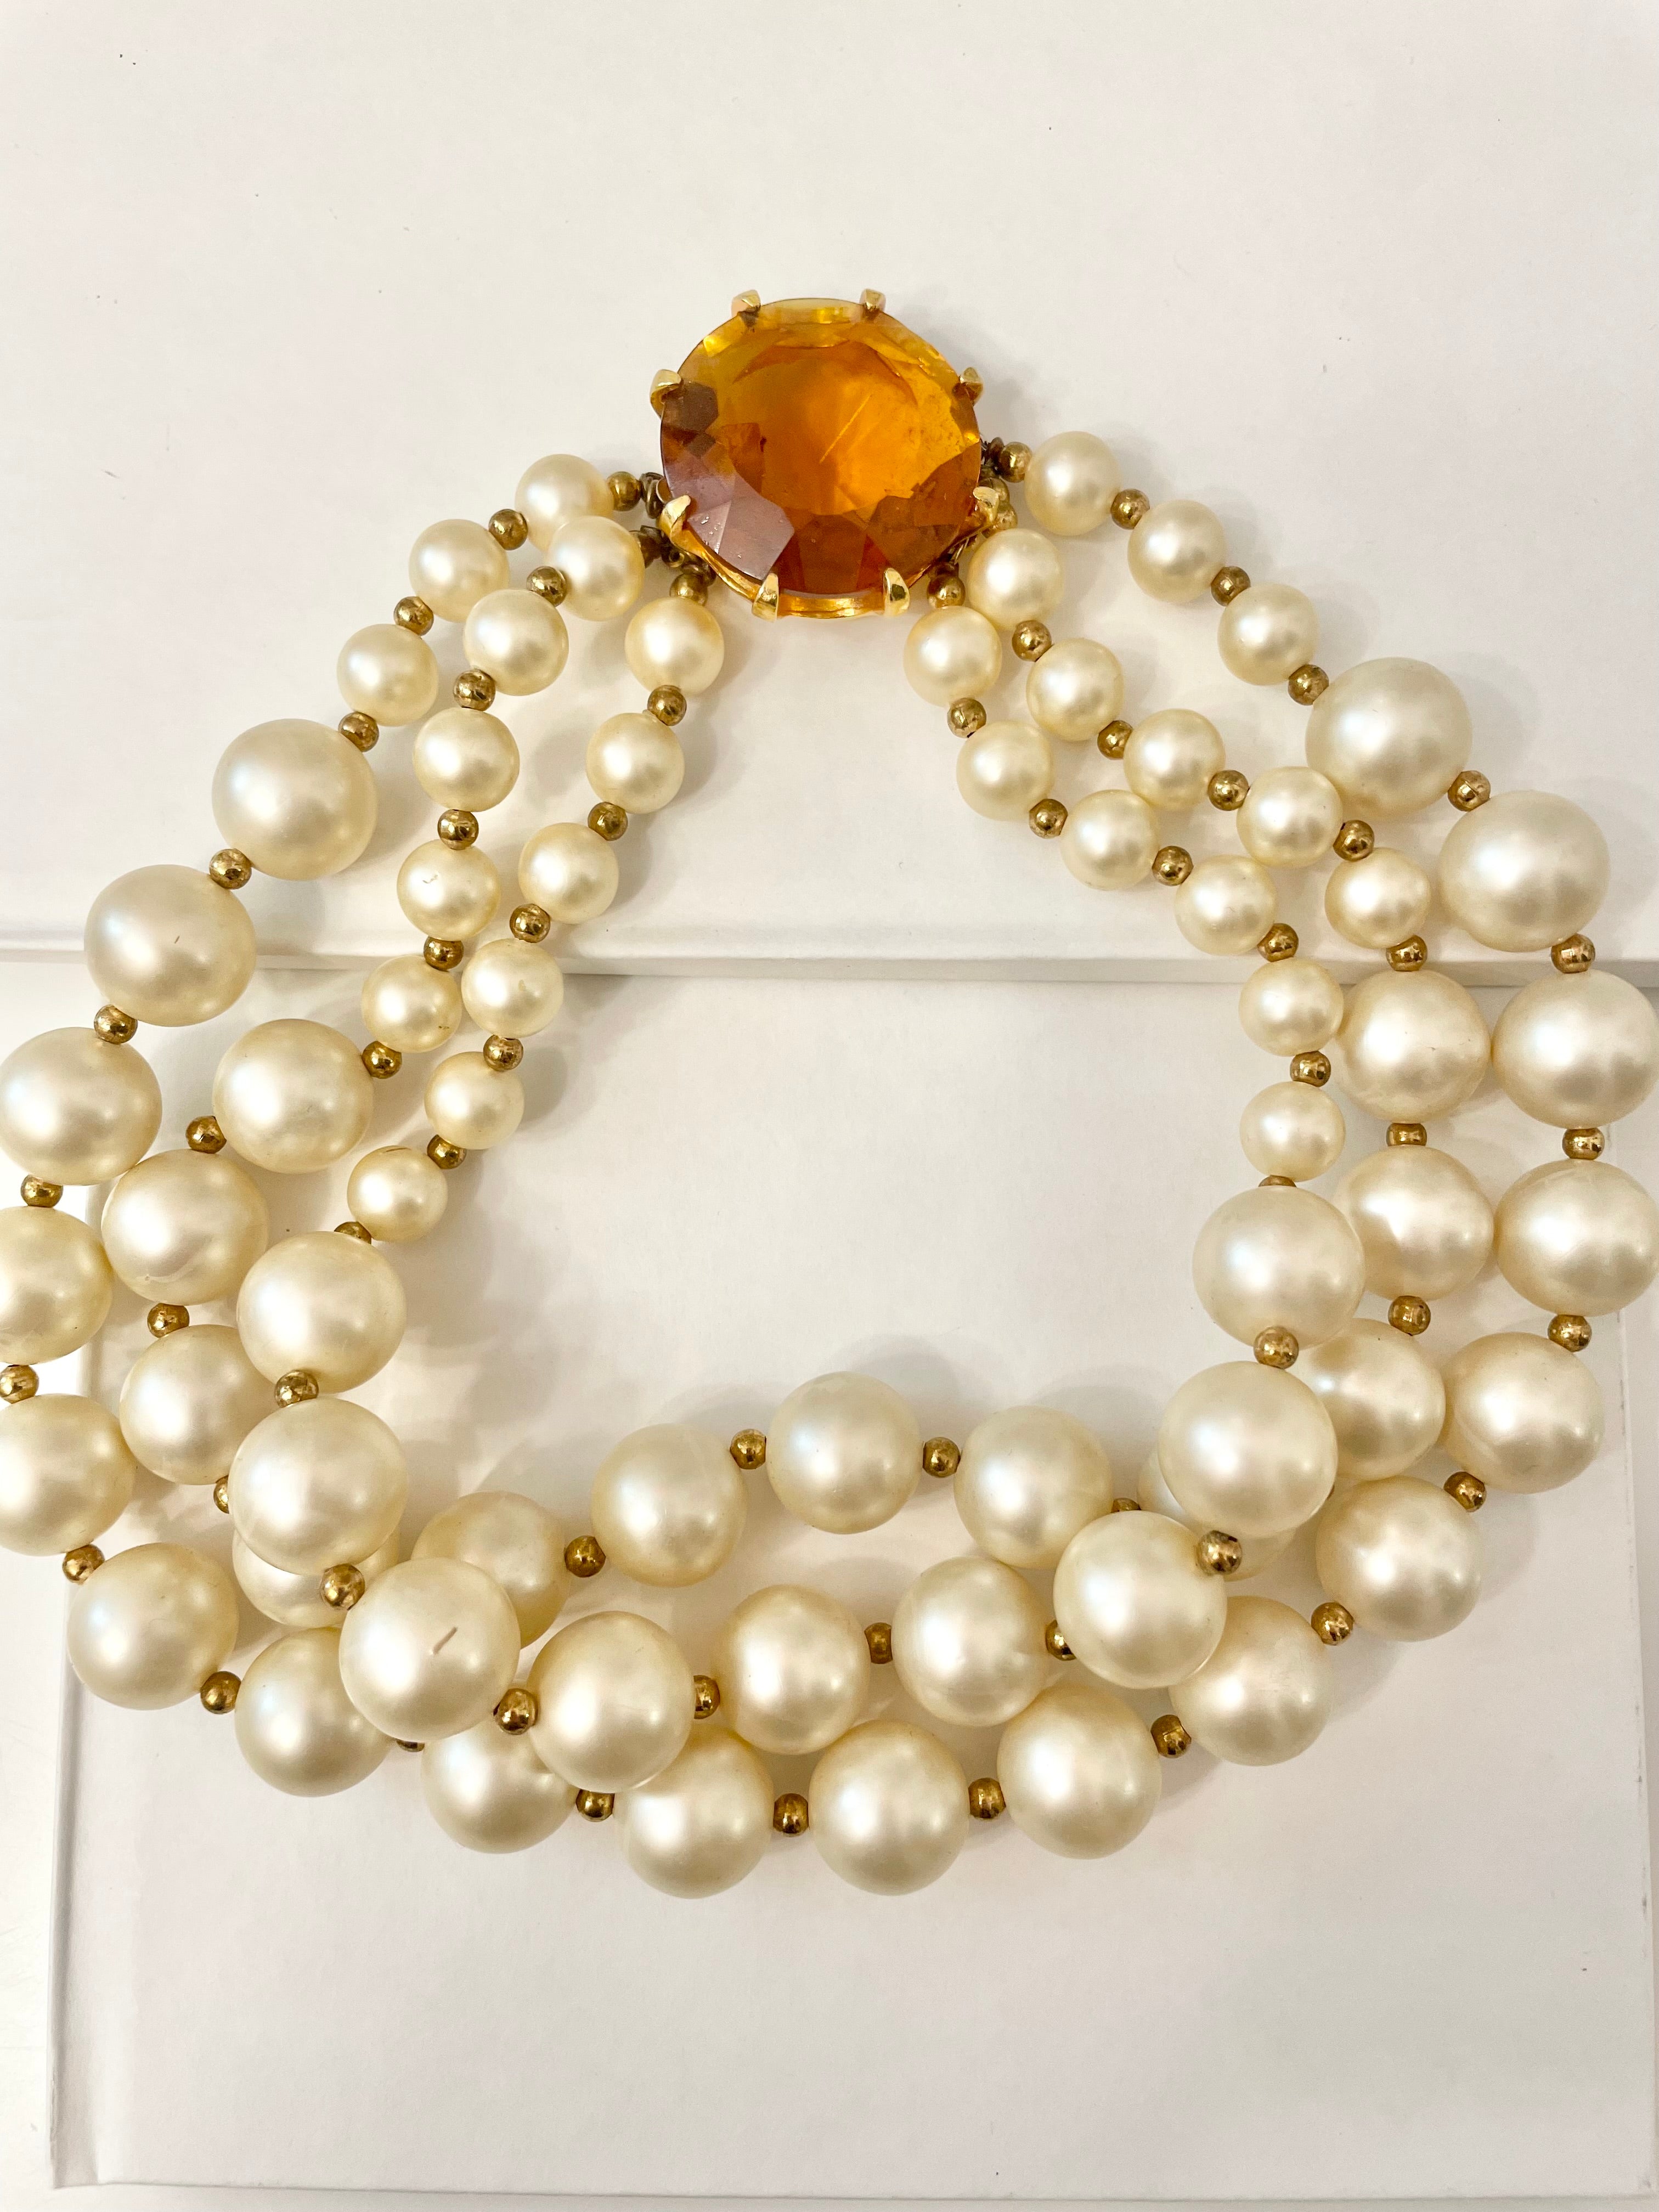 Isn't she Charming.... a fabulous three strand, large pearl necklace... with stunning amber glass clasp. Divine!!